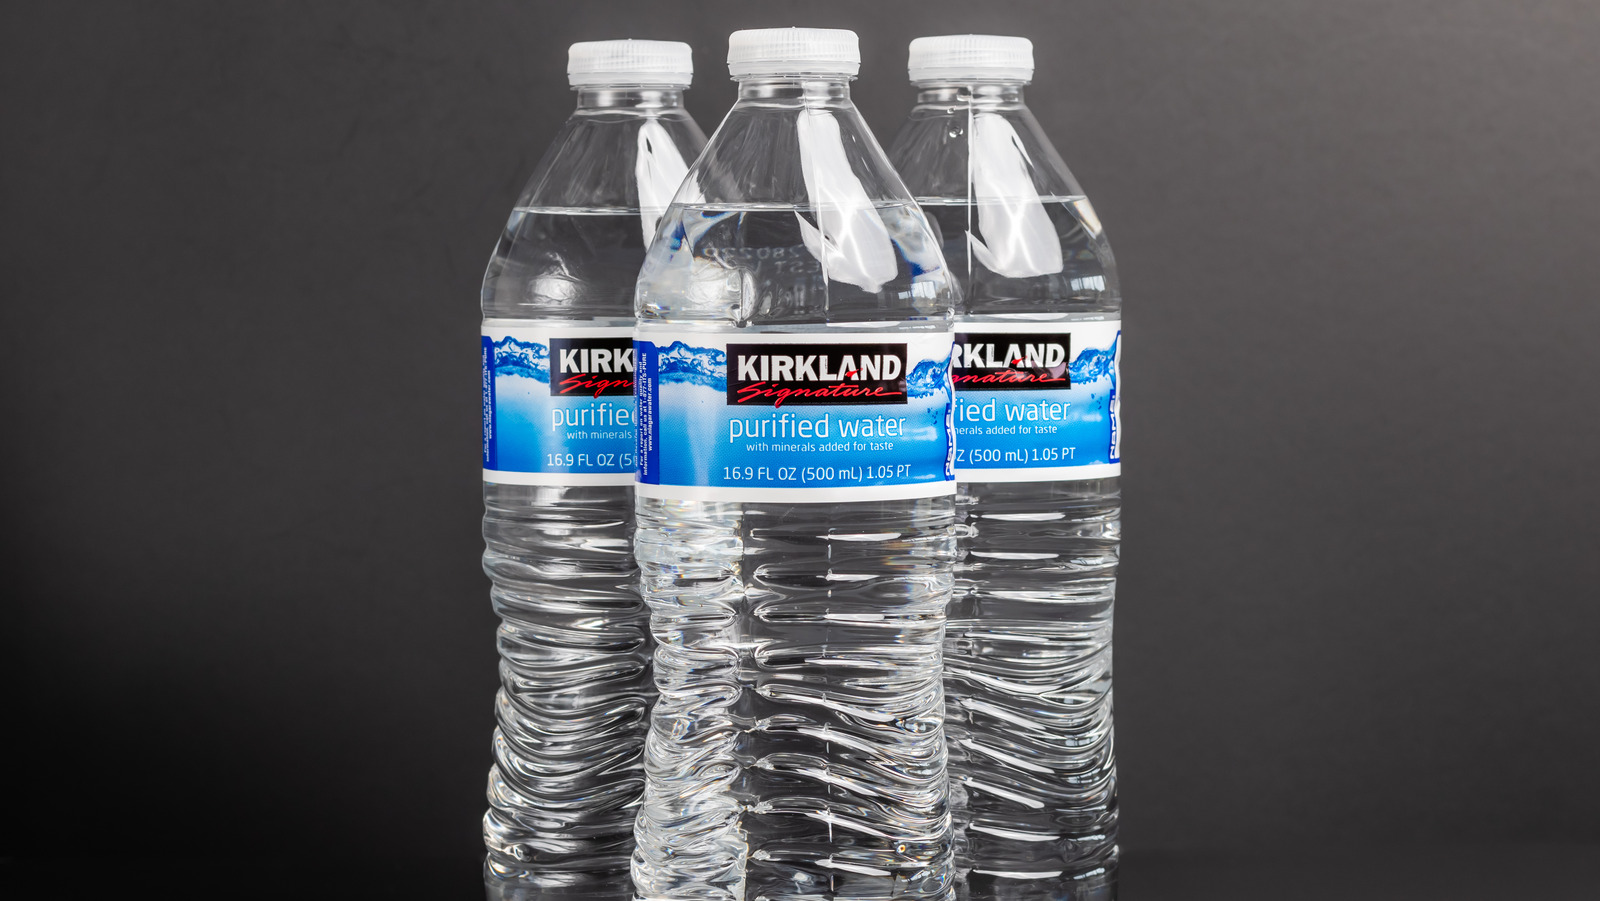 What Company Makes Costco's Kirkland Brand Bottled Water?